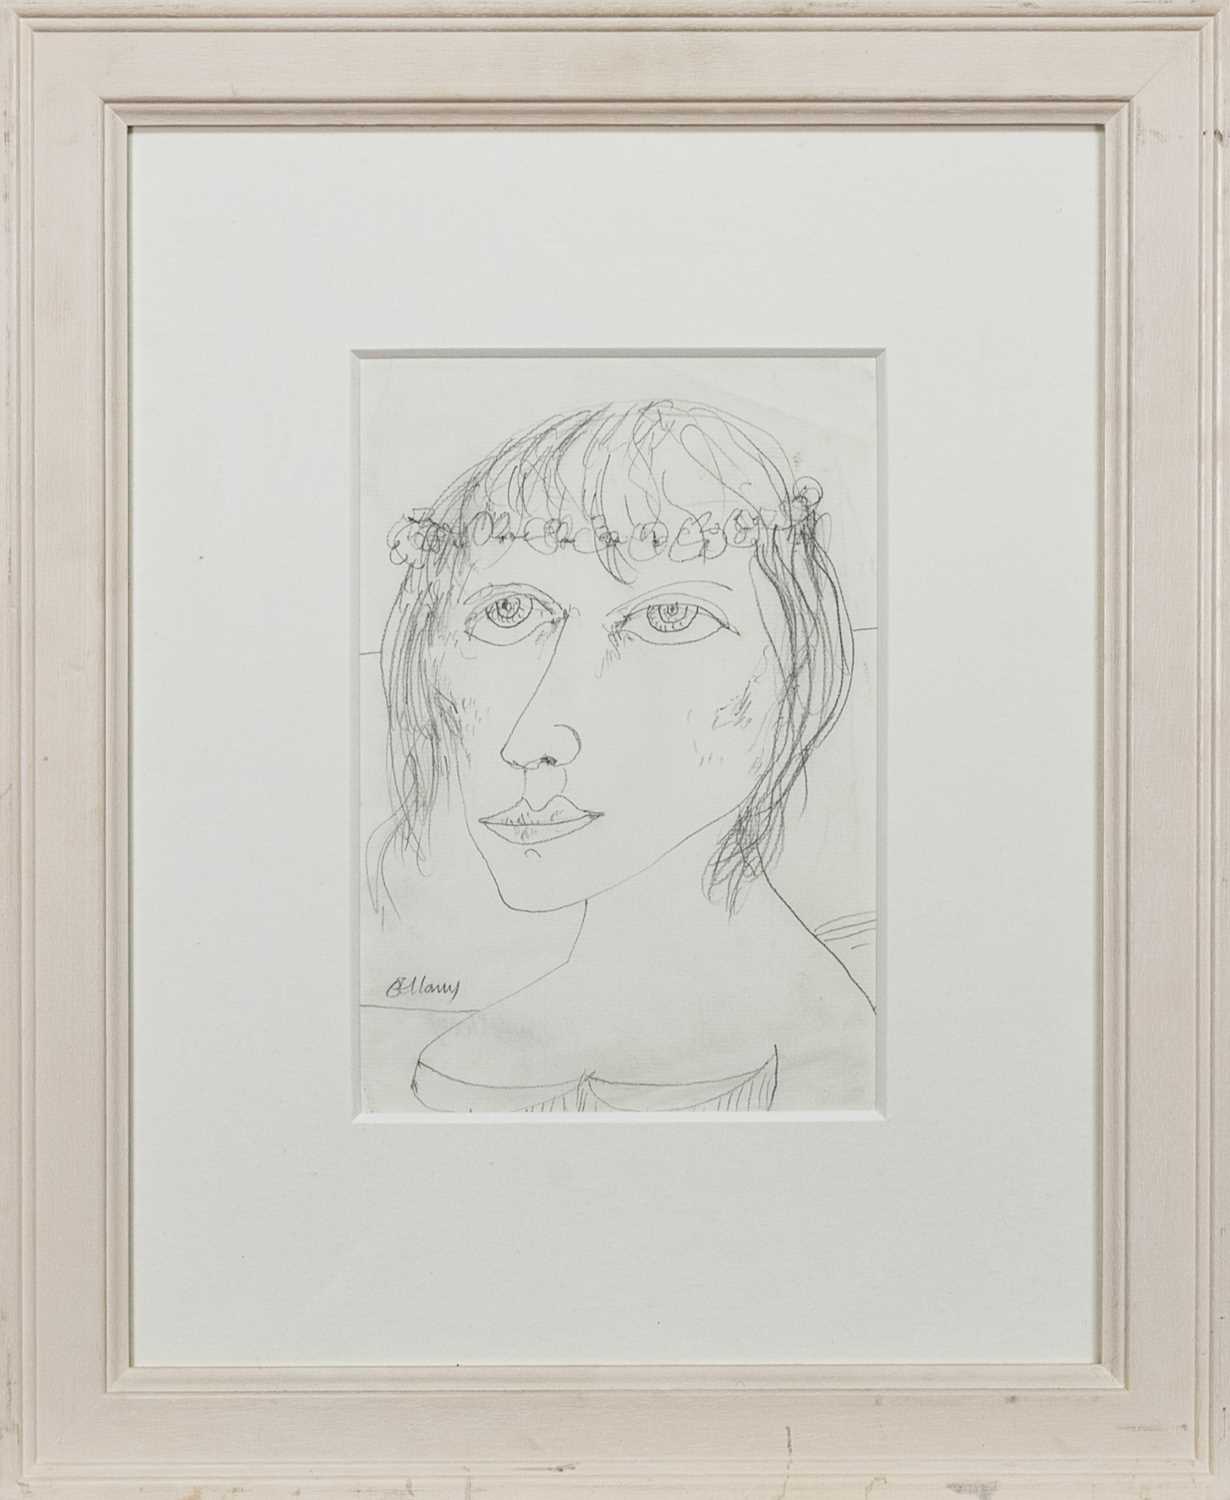 Lot 228 - WOMAN WITH FLOWER CROWN, A PENCIL DRAWING BY JOHN BELLANY